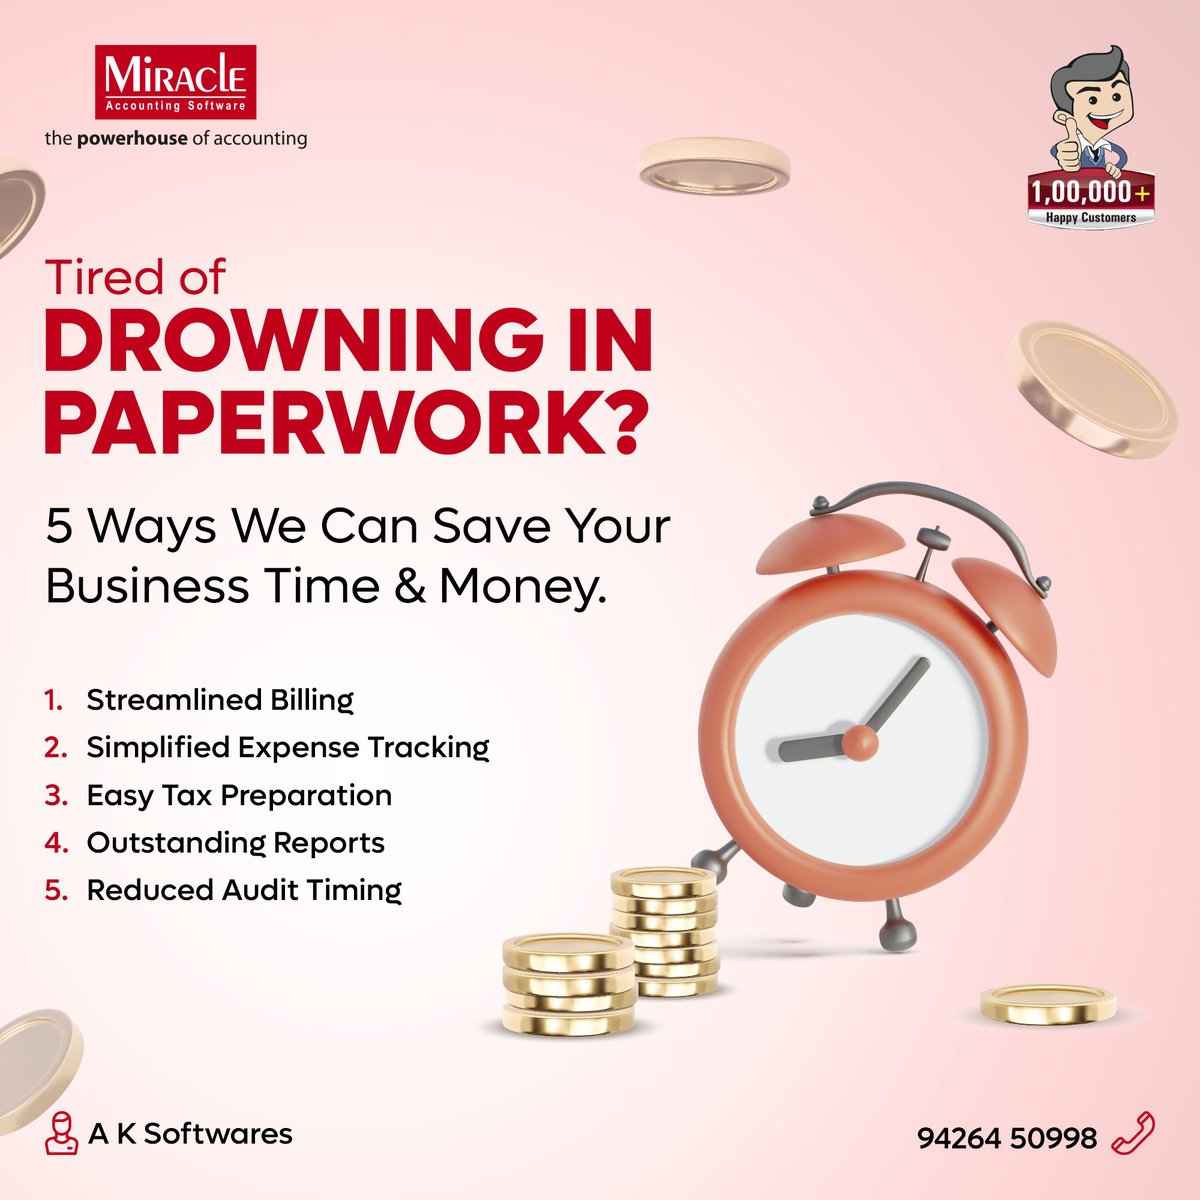 𝐂𝐨𝐧𝐧𝐞𝐜𝐭 𝐟𝐨𝐫 𝐚 𝐅𝐫𝐞𝐞 𝐃𝐞𝐦𝐨:
- Dial: 094264 50998
- Web: aksoftwares.in

#Miracleaccountingsoftware
#Accountingsoftware
#financialyear #aksoftware #NewFinancialYear #AccountingSoftware #MiracleAccounting #FinancialGoals #Empowerment #FreeTrial #price